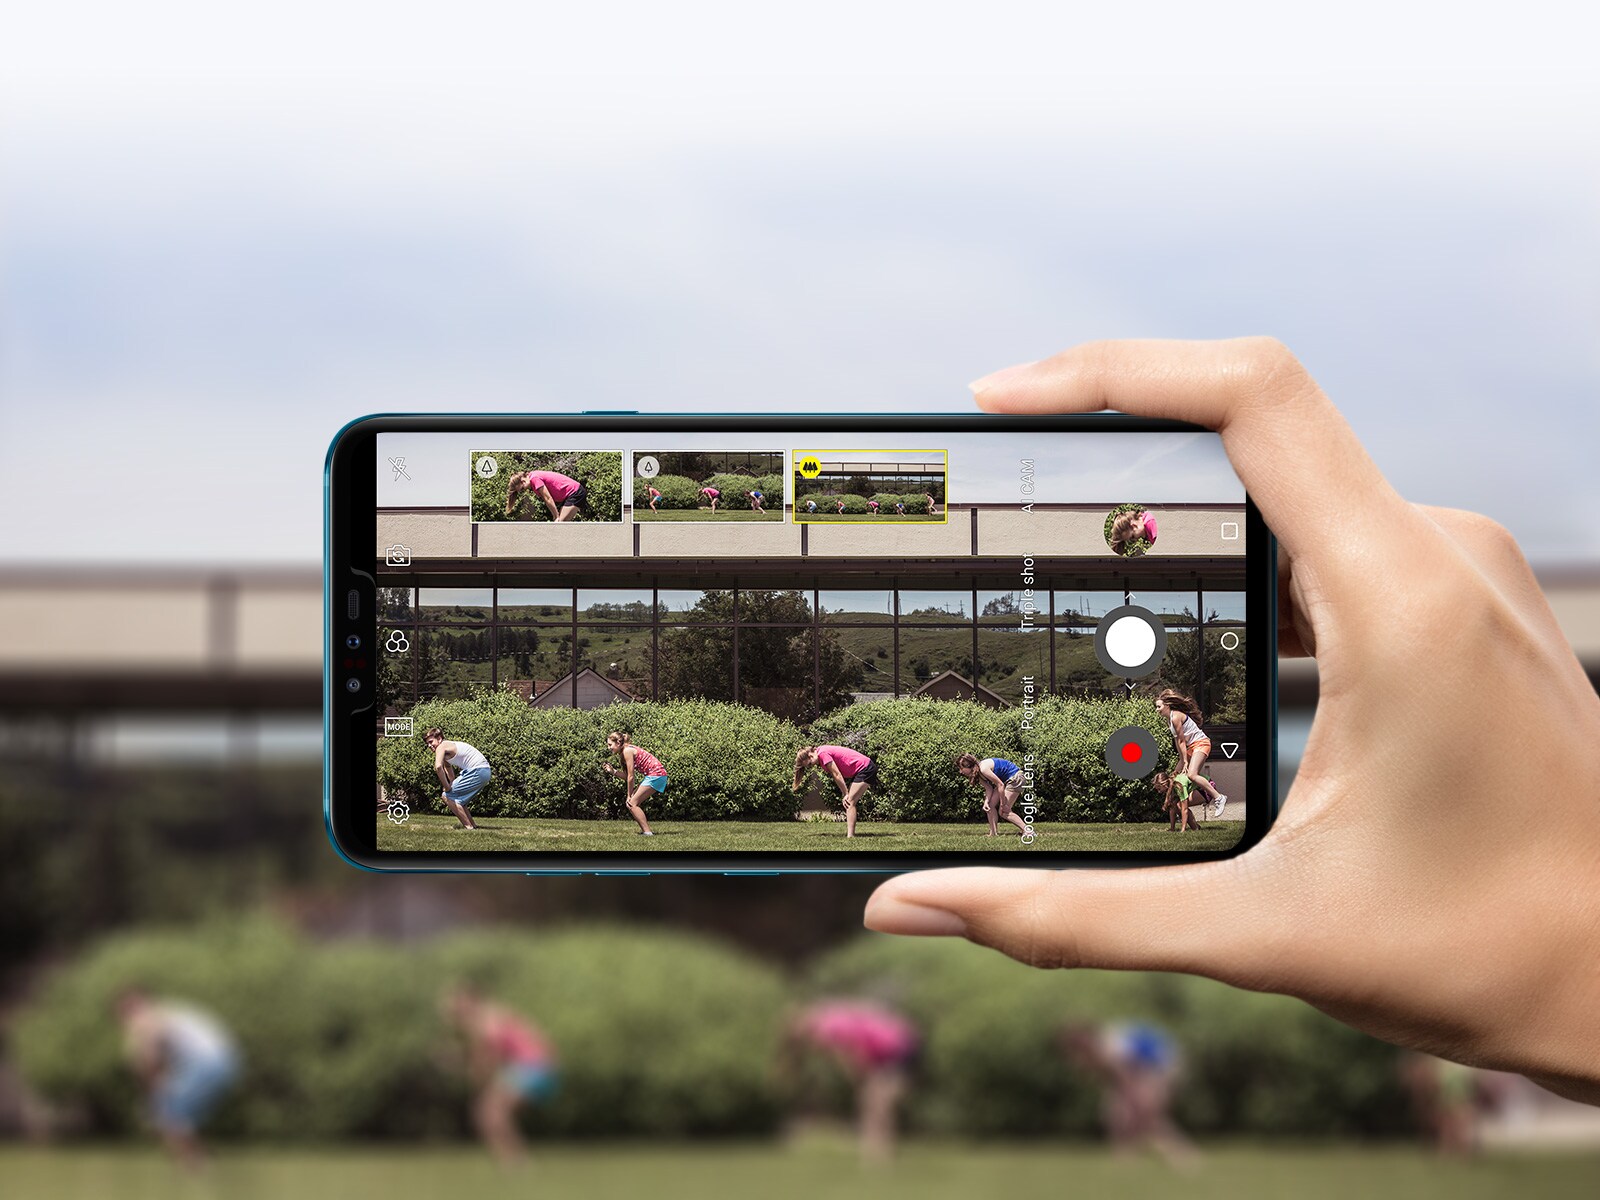 Camera features offered by LG® mobile